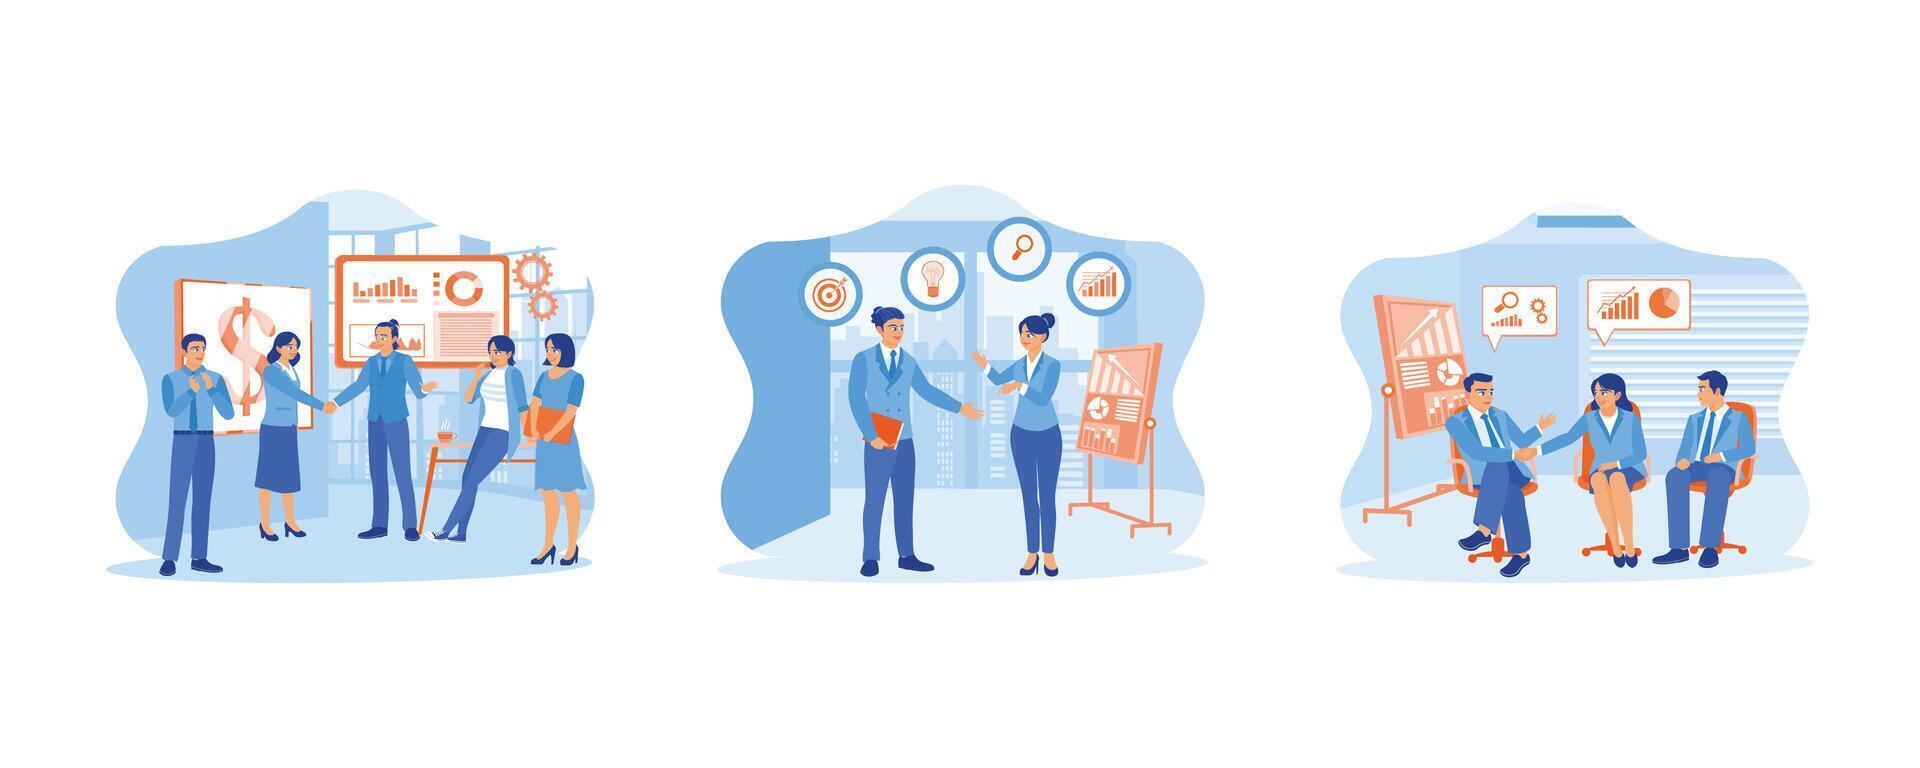 New employees concept. Meet and negotiate during meetings. Discuss the work process on a new project. Discuss together during meetings. set flat vector modern illustration